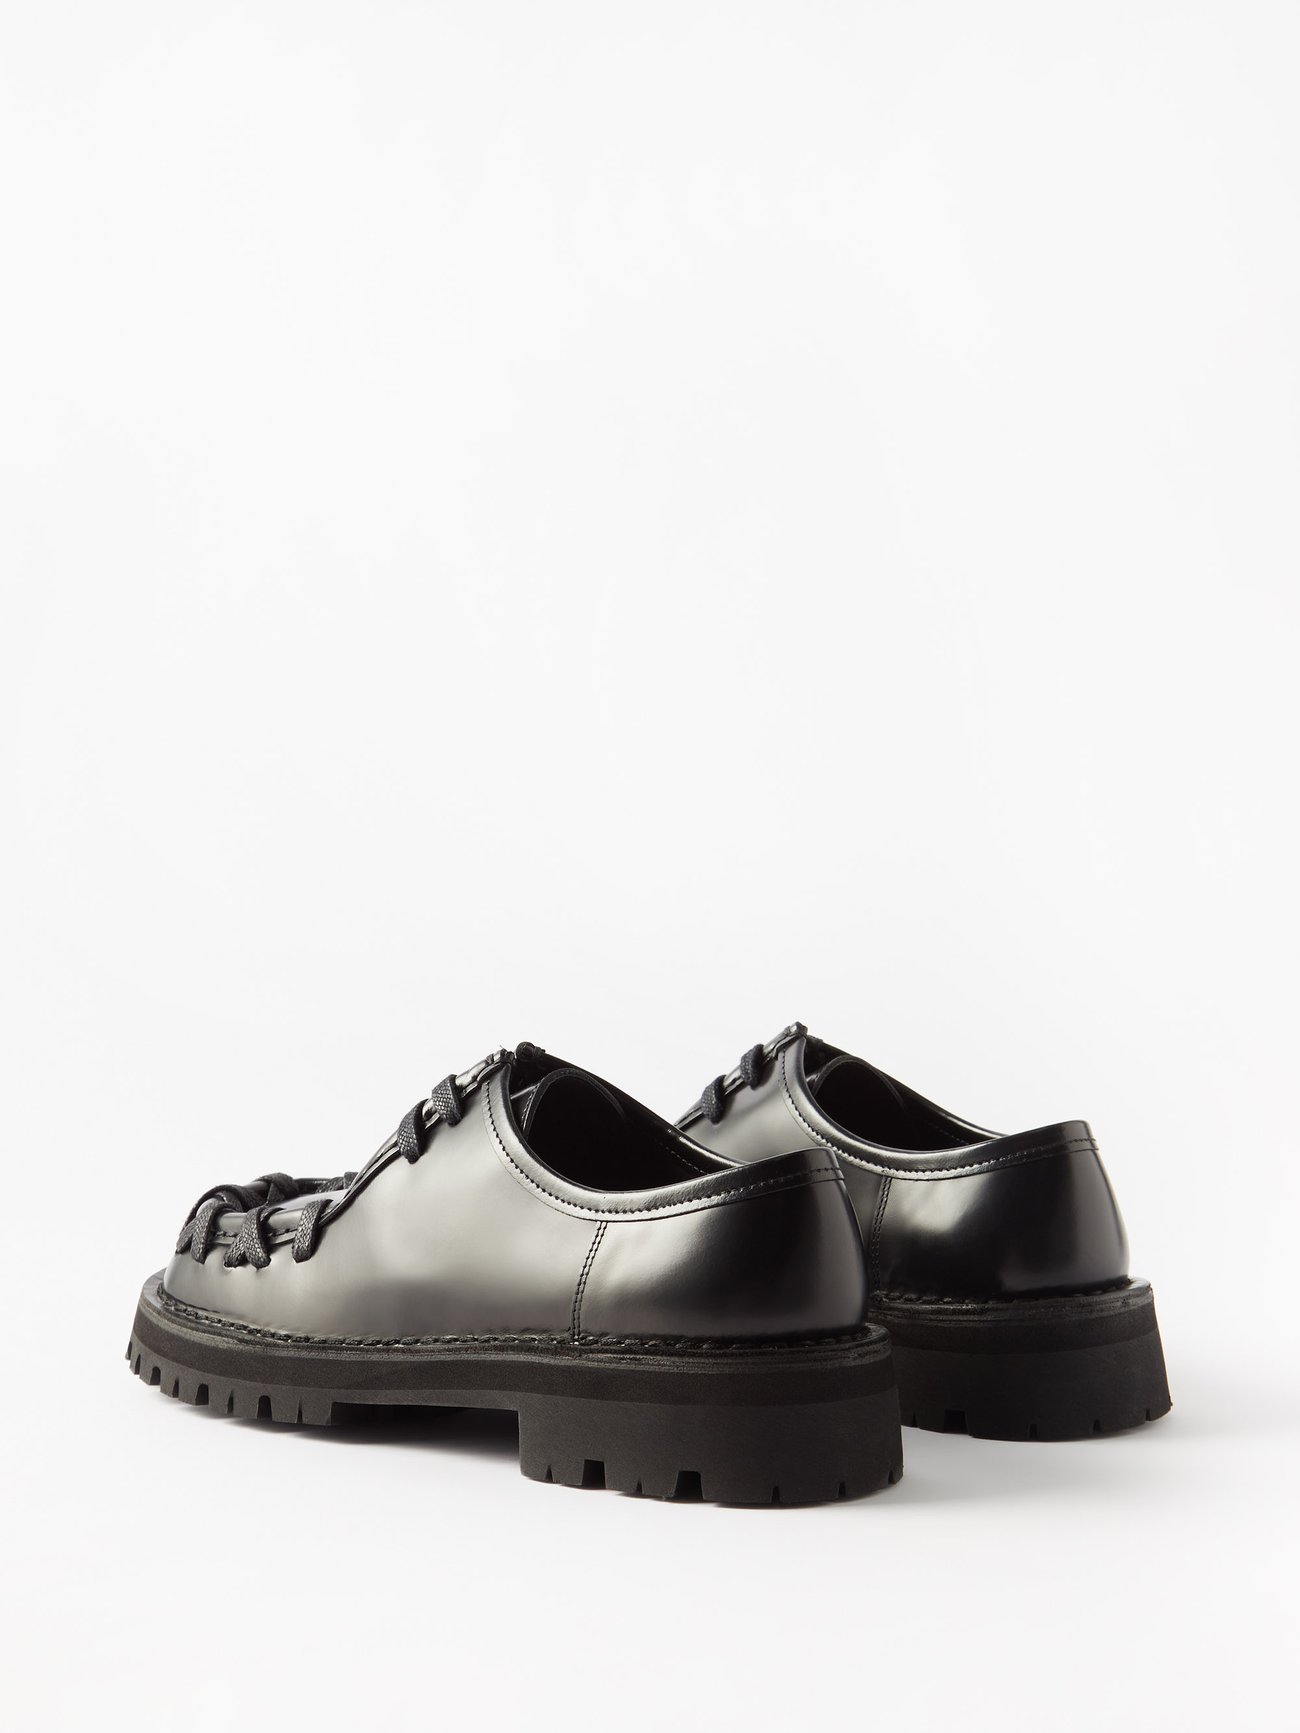 leather CAMPERLAB Black Derby shoes Mimi MATCHES | UK |